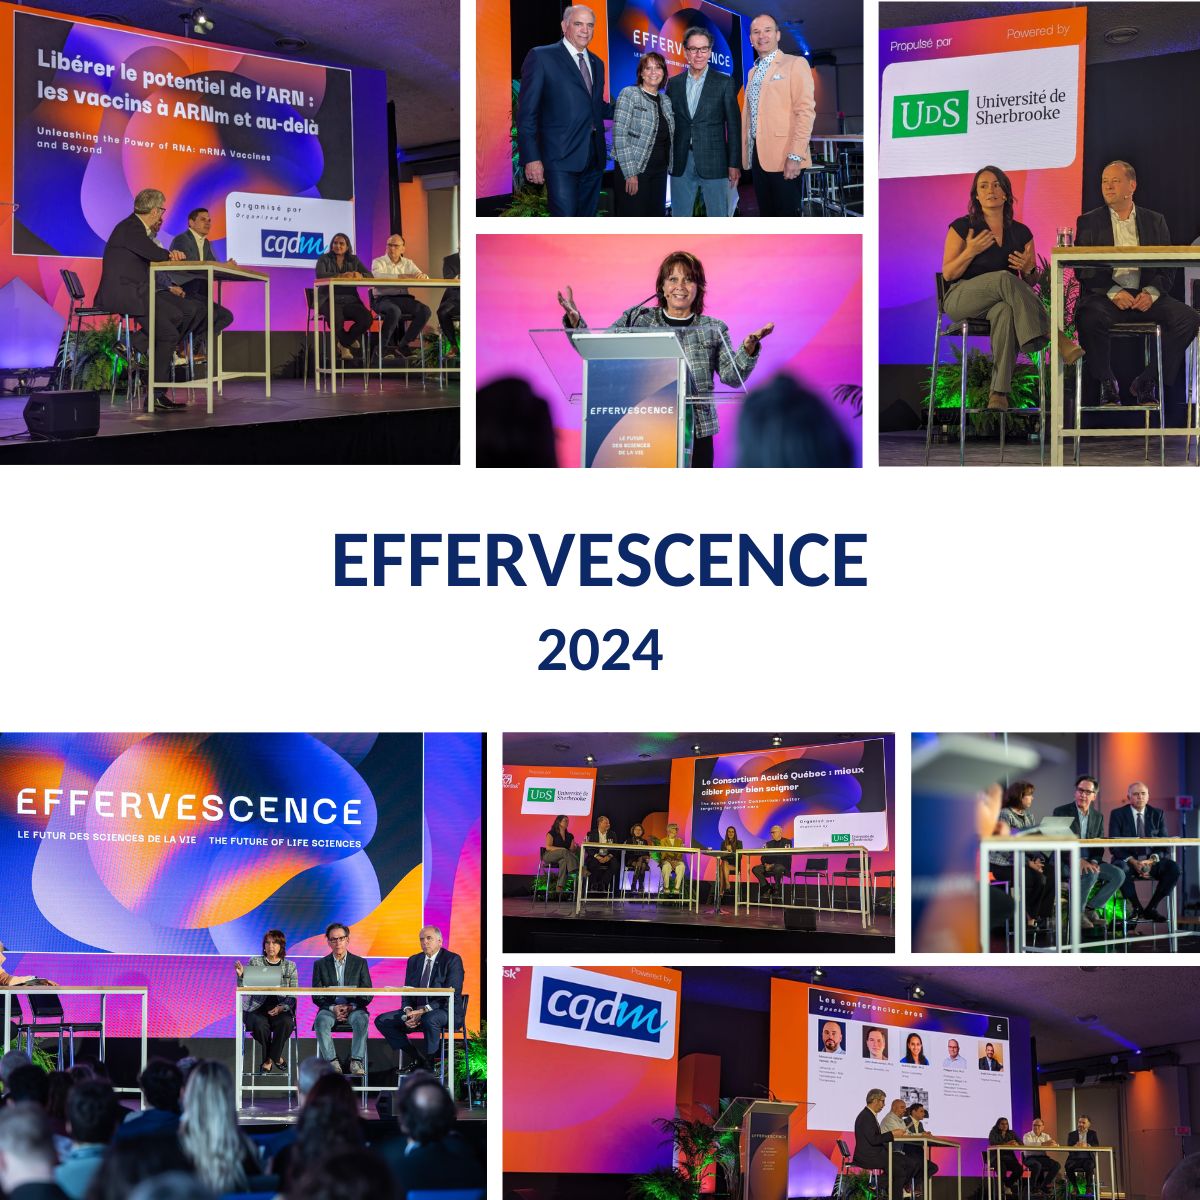 We were honored to be invited to @EffervescenceV conferences, where we presented two major projects: creation of a global hub for RNA-based therapies and funding for a research project on diabetic kidney disease. More information on our news 👉: cqdm.org/en/news/